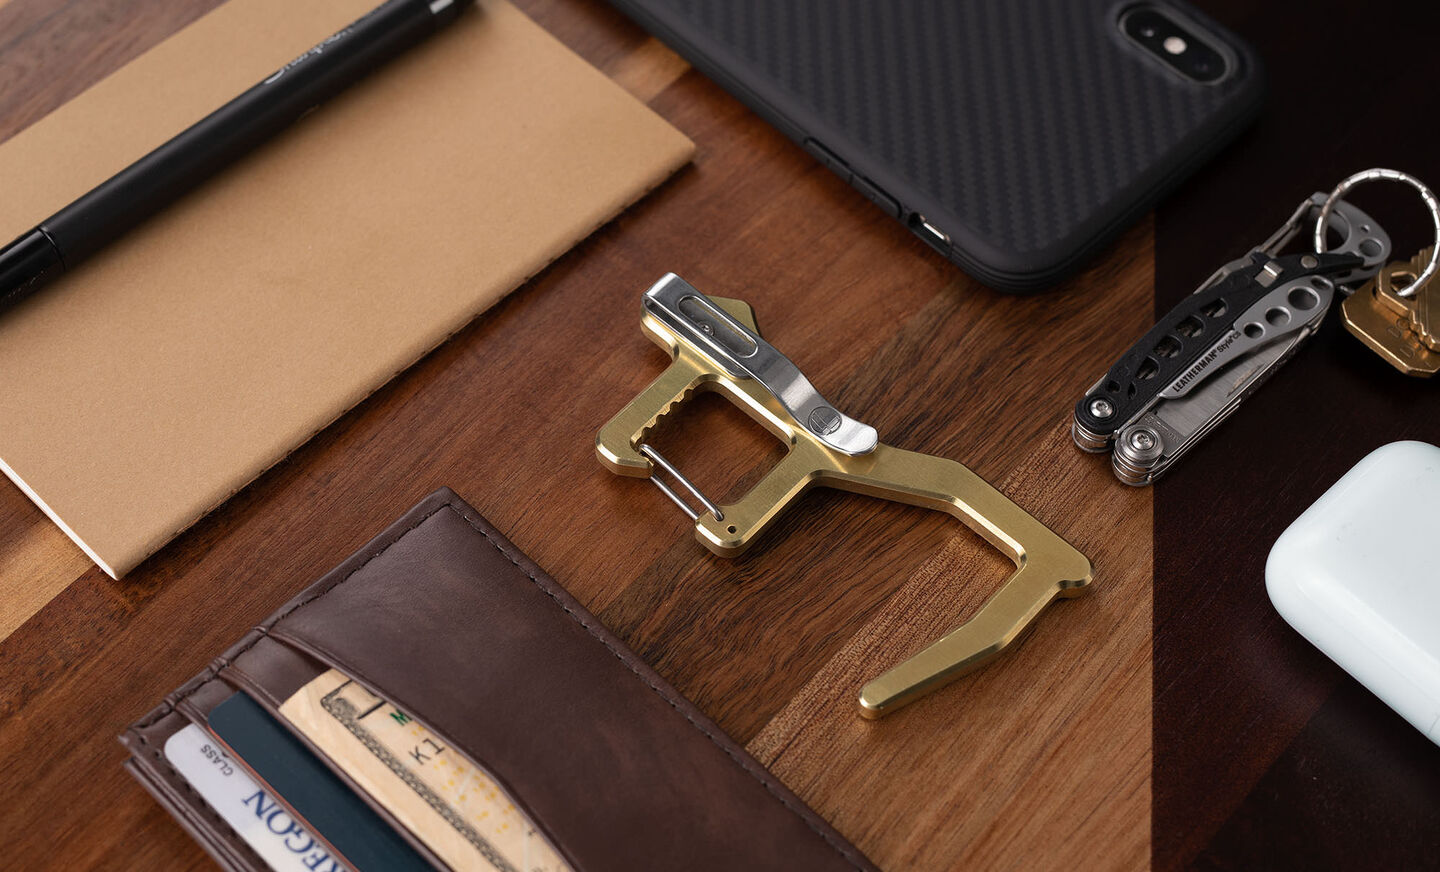 Clean Contact Carabiner on a desk next to a phone and wallet